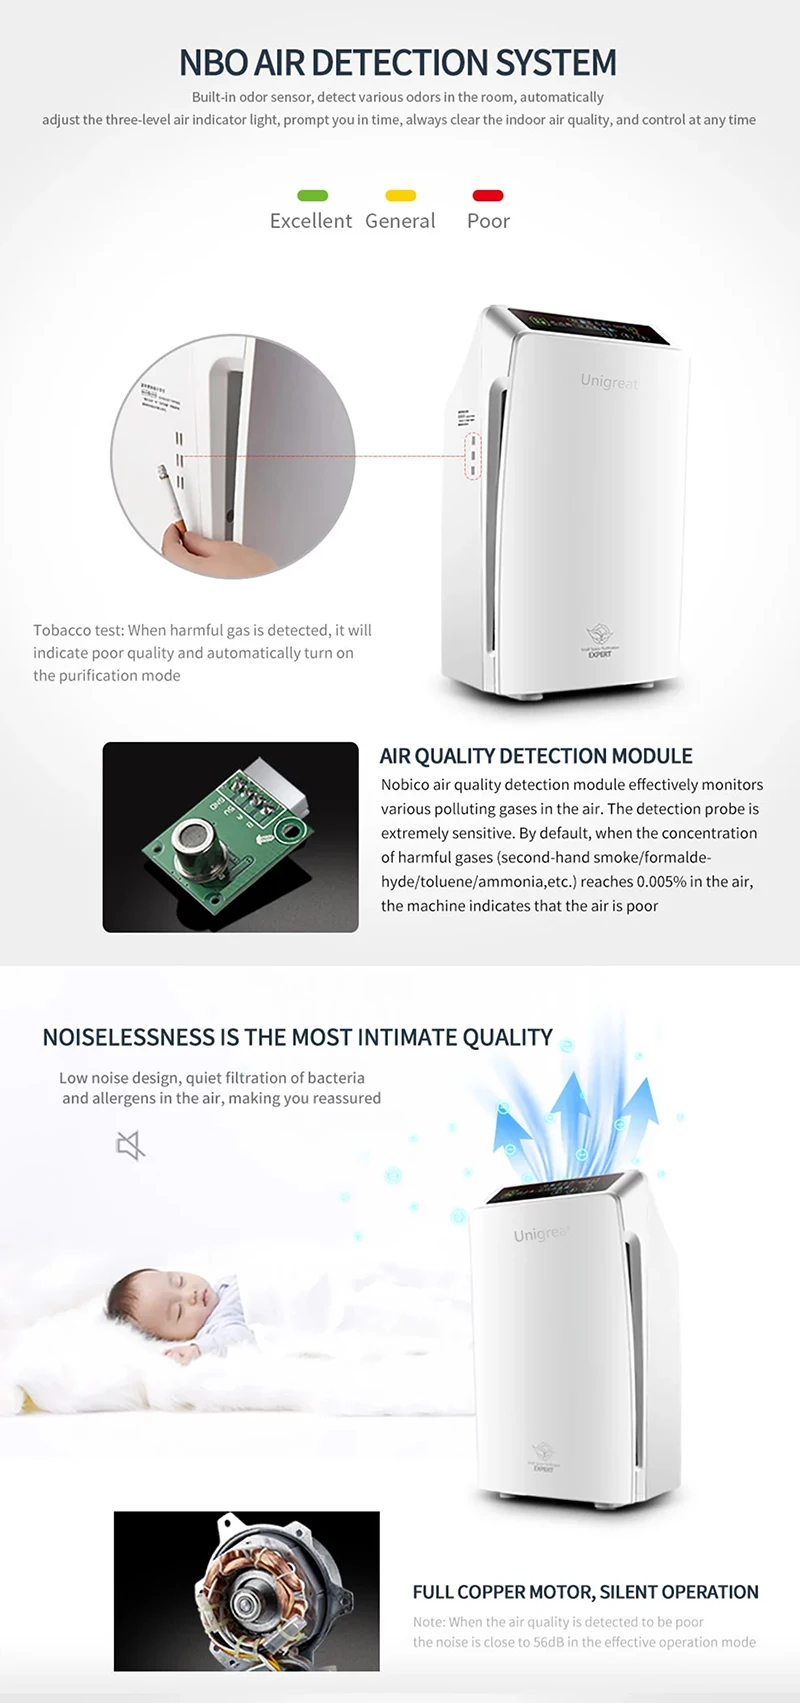 CE Certificate Wholesale Portable Air Purifier Negative ion Hepa Air Purifier 220v Household Infrared Remoteair Purifier Filter